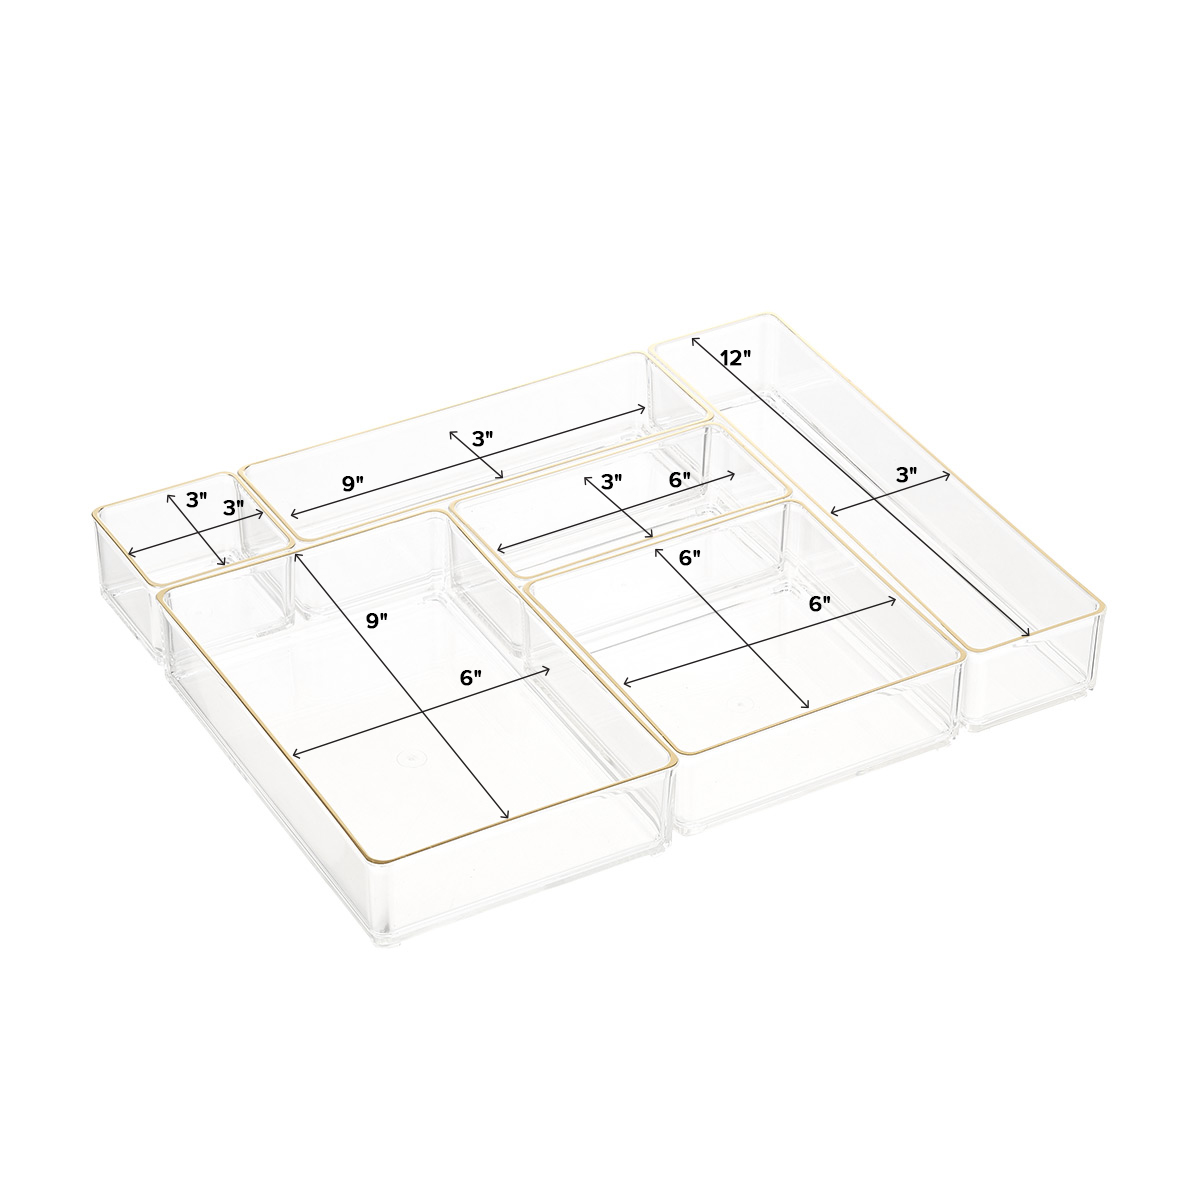 Luxe Acrylic Stacking Drawer Organizers Gold Trim Set of 5 | The Container Store